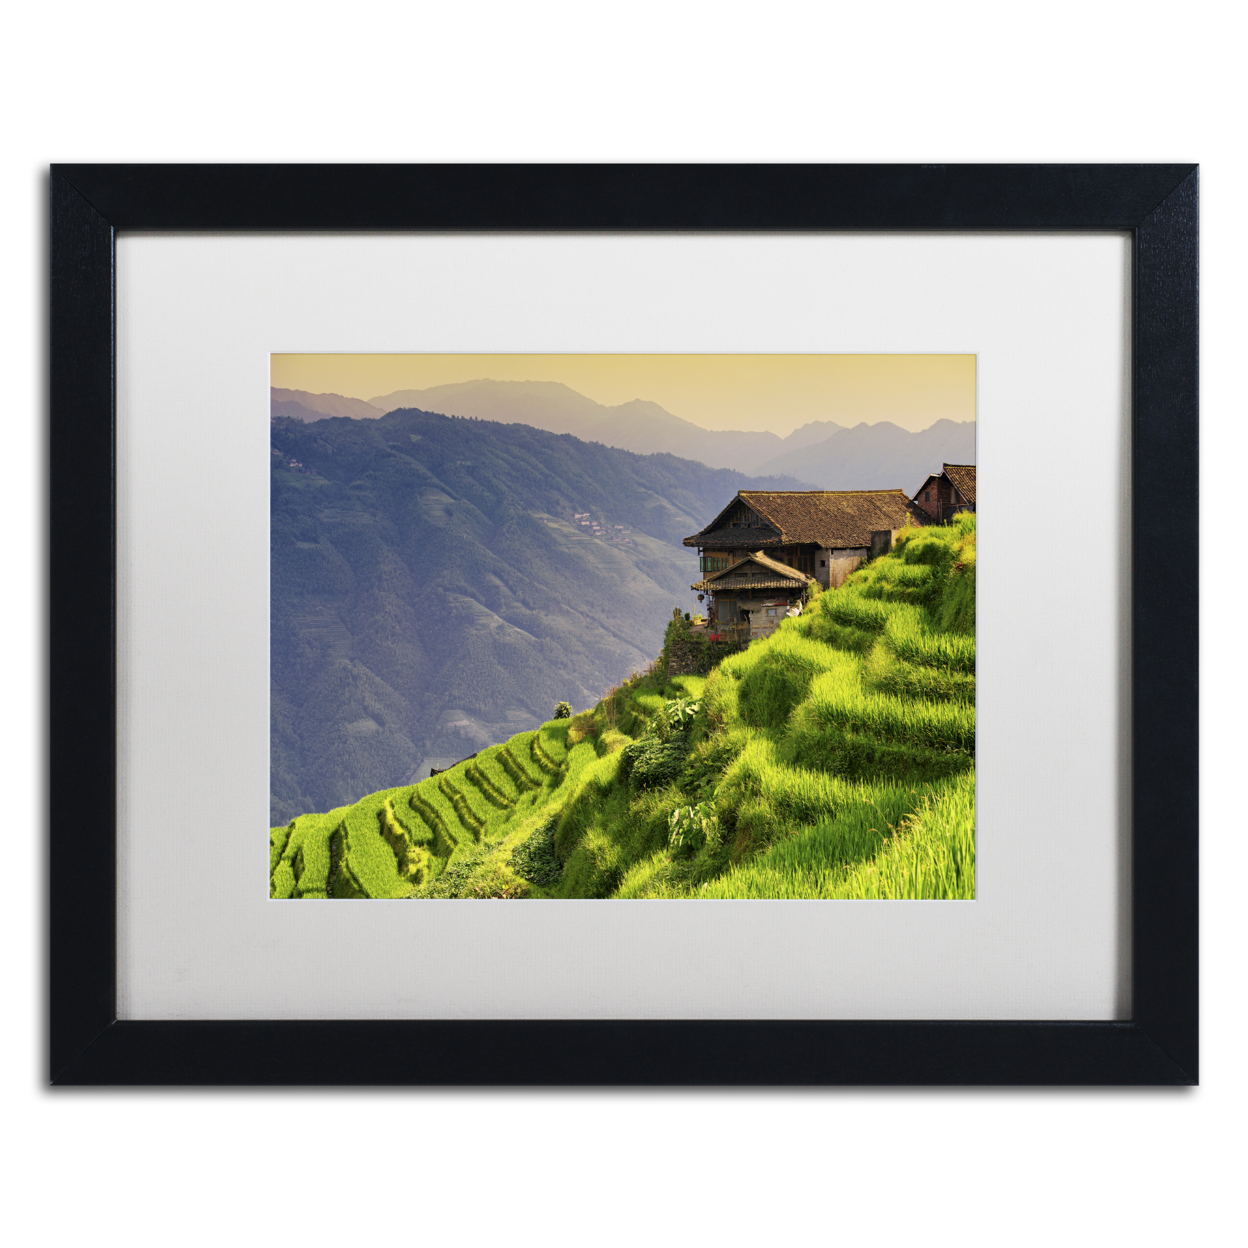 Philippe Hugonnard 'Rice Terraces' Black Wooden Framed Art 18 X 22 Inches